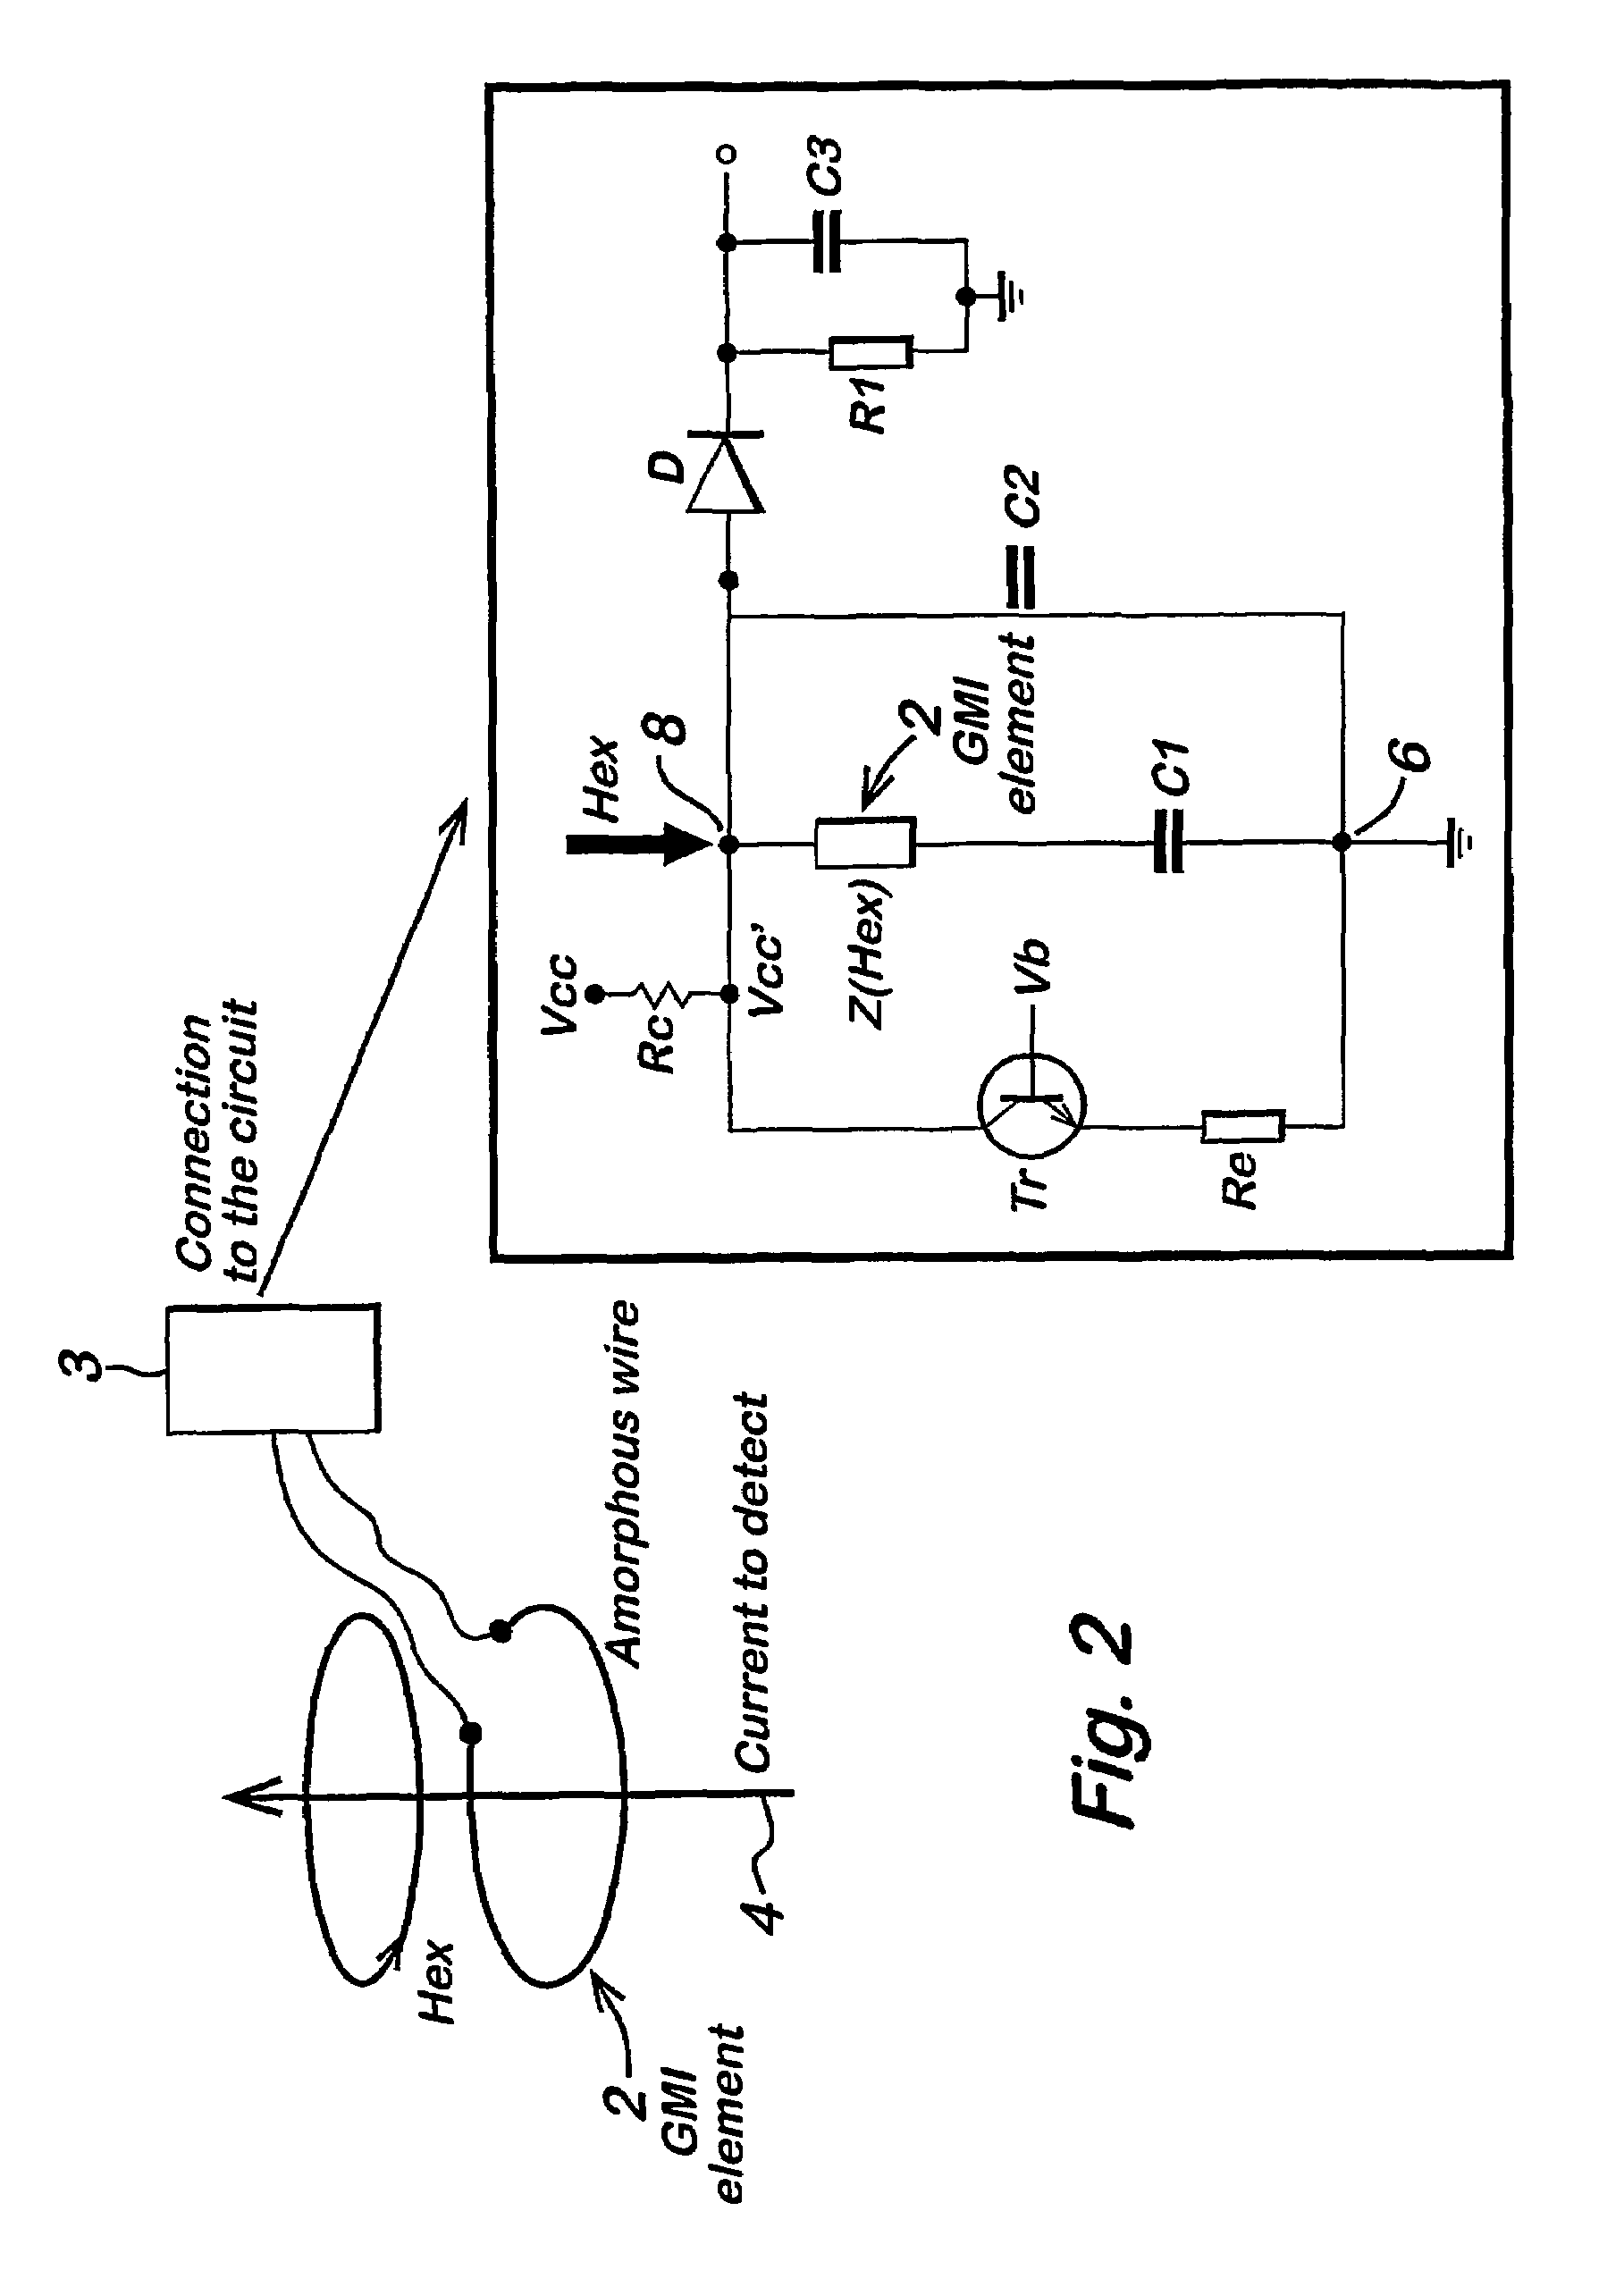 Magnetic field detector and a current monitoring device including such a detector